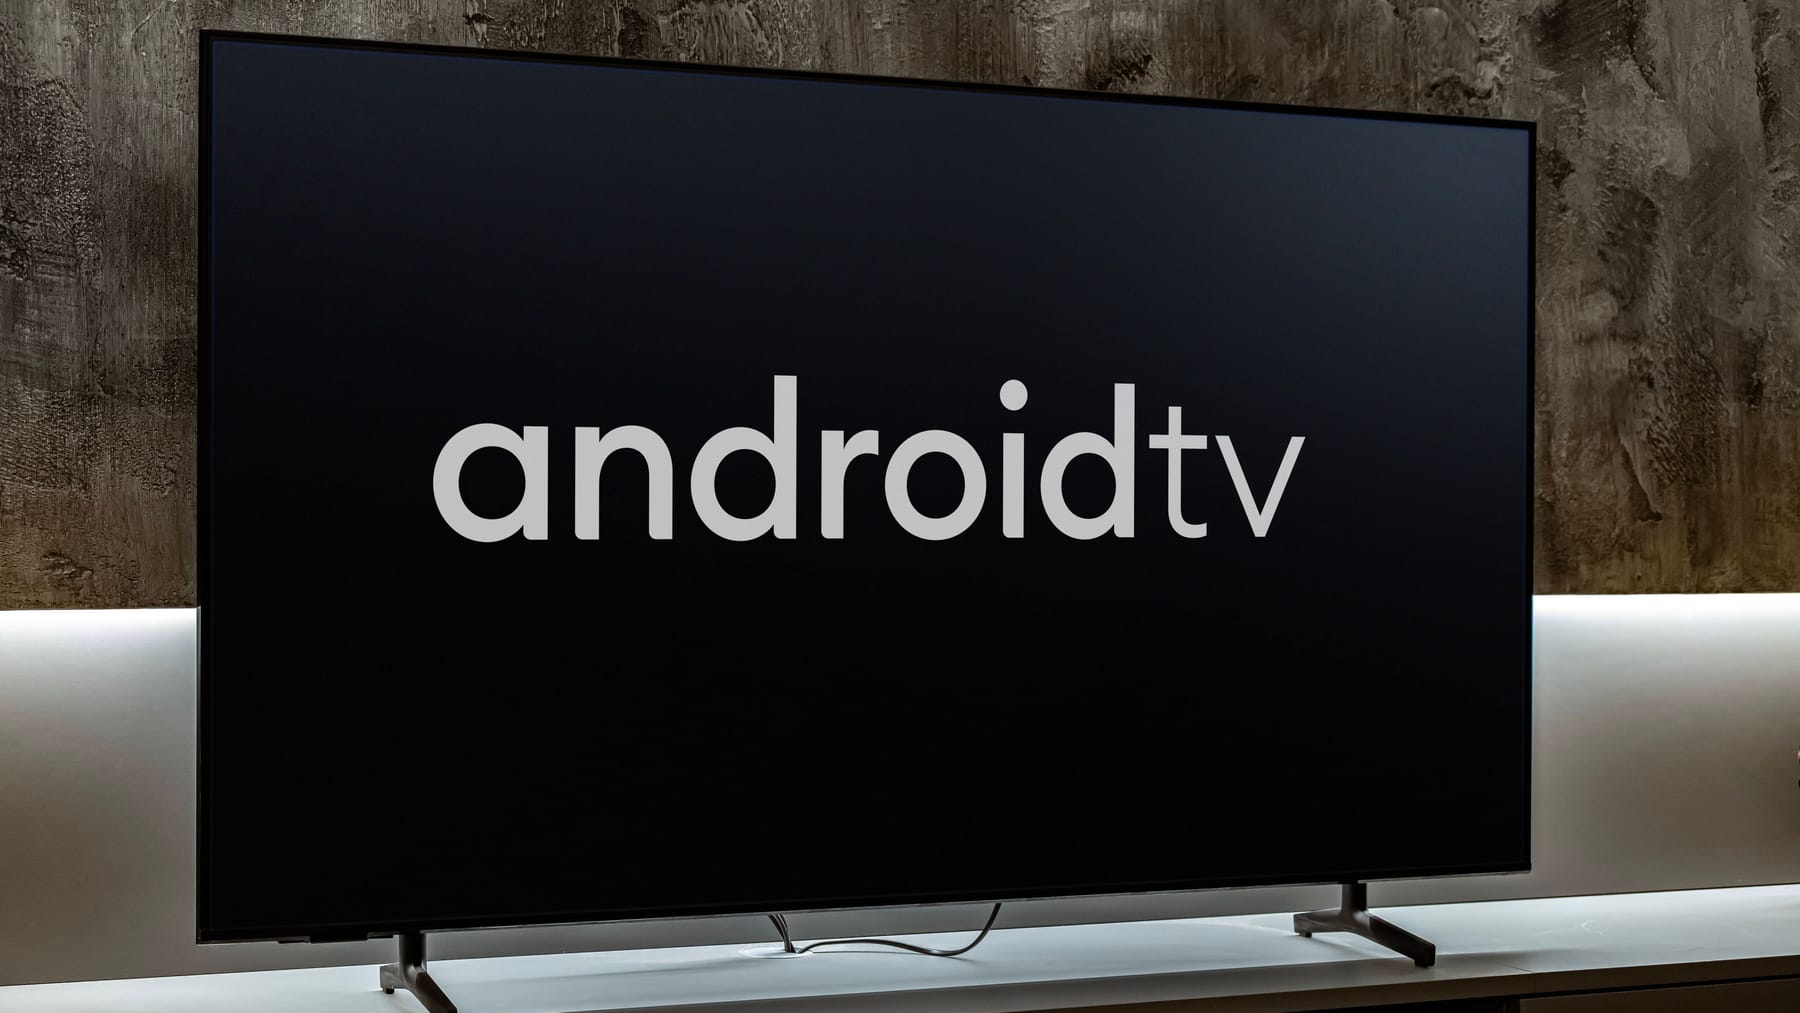 Android TV vulnerability: Hackers gain access to sensitive data